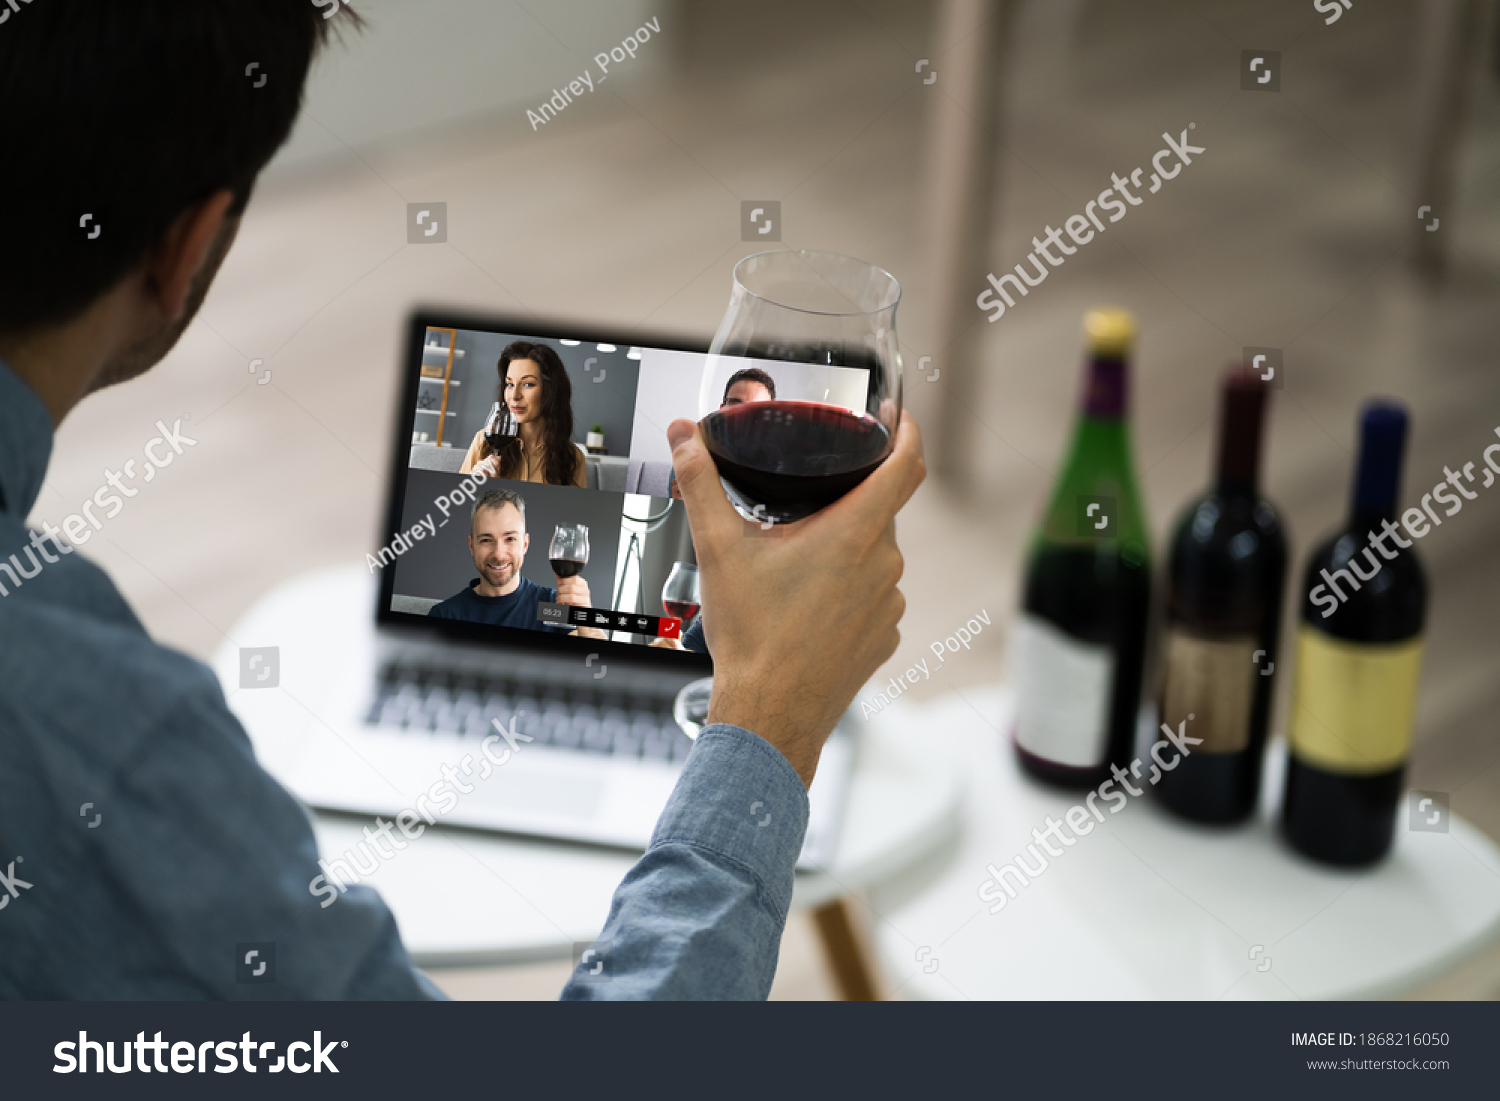 Virtual Wine Tasting Event Party On Laptop #1868216050